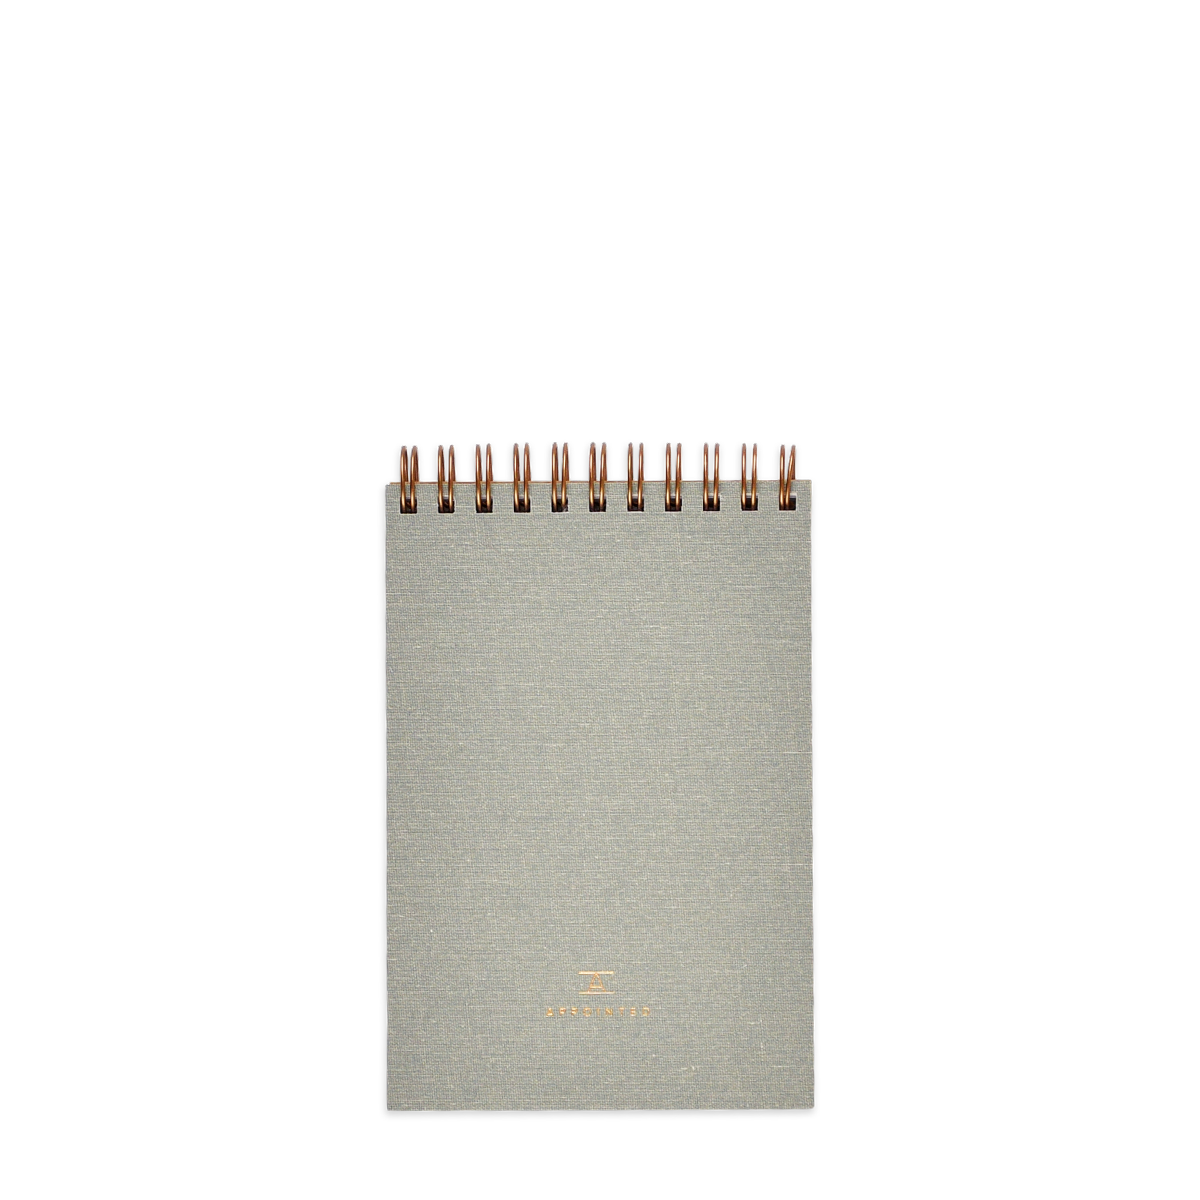 APPOINTED - POCKET NOTEBOOK - DOVE GREY